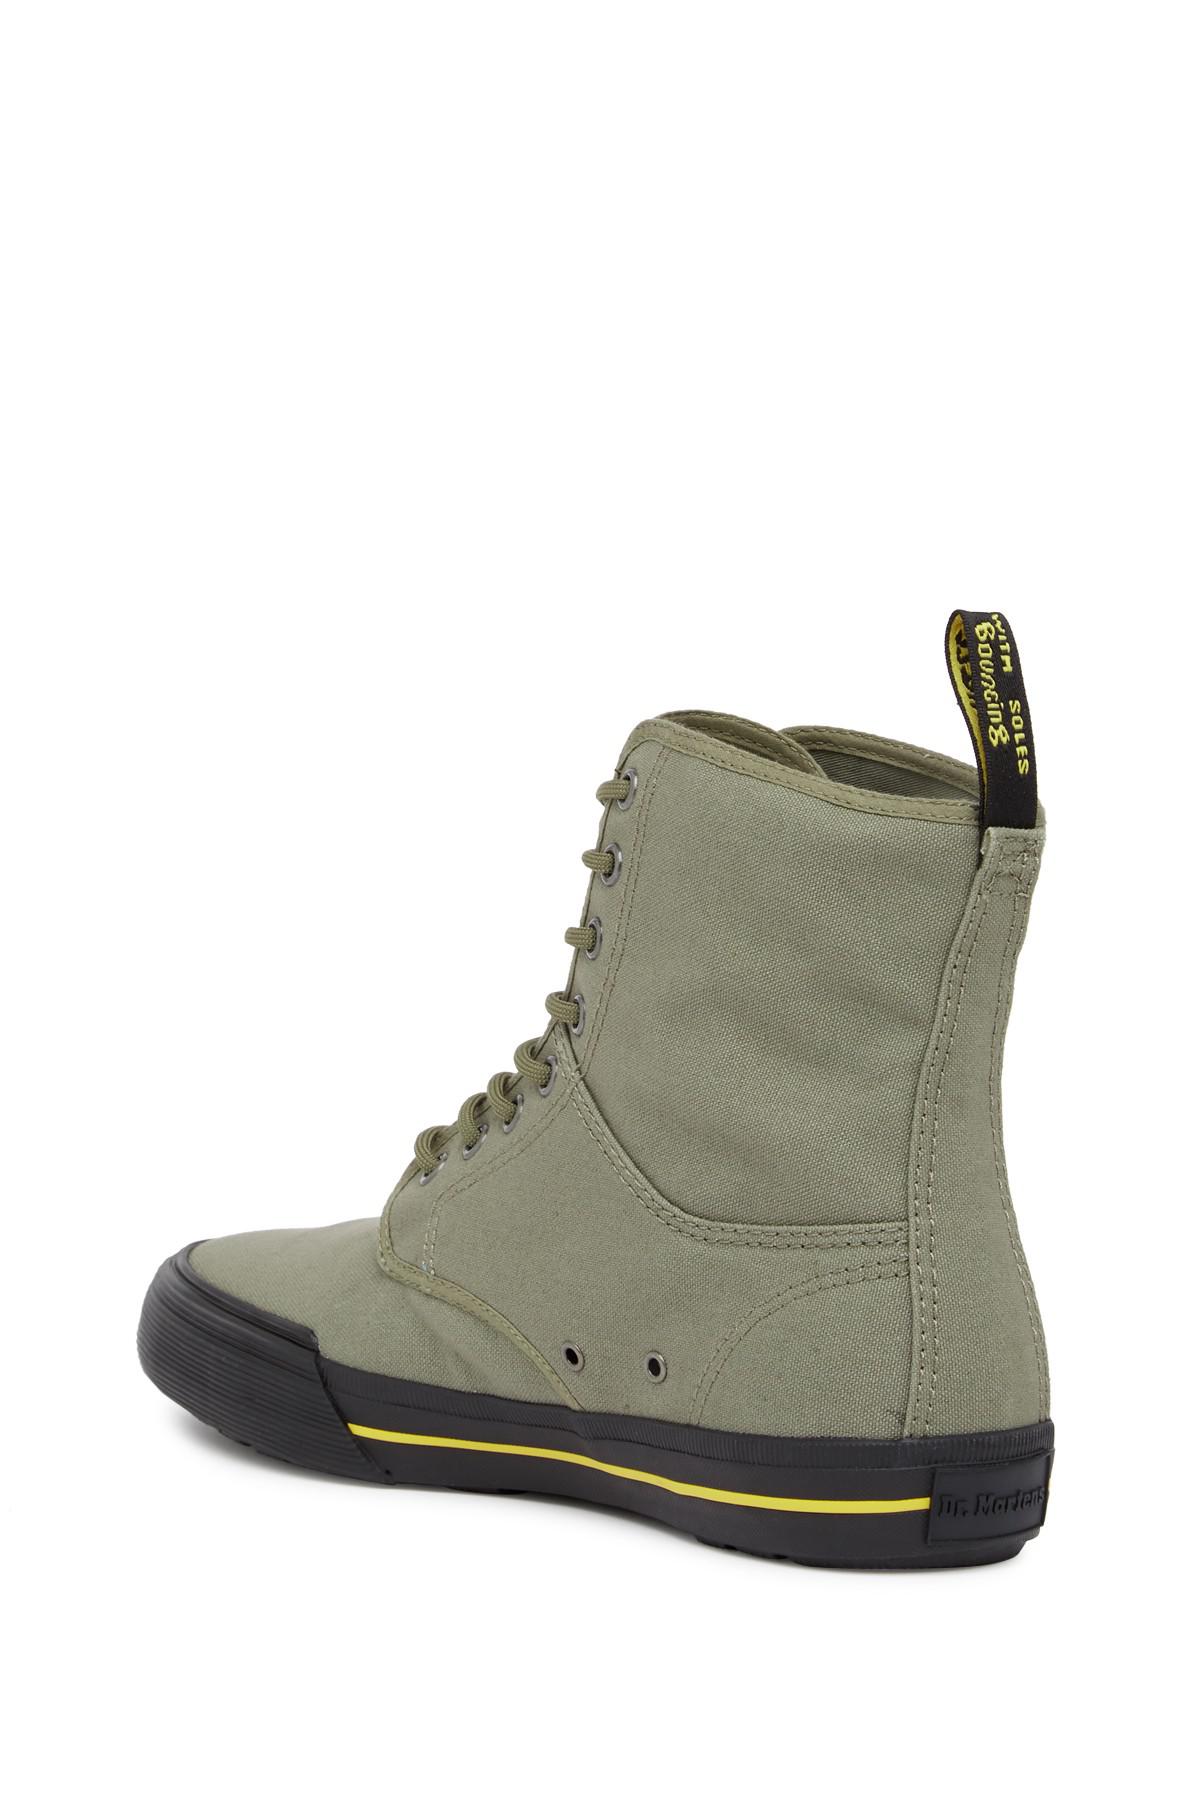 Dr Martens Winsted Canvas Review Hot Sale, 51% OFF | kcsa.com.pa